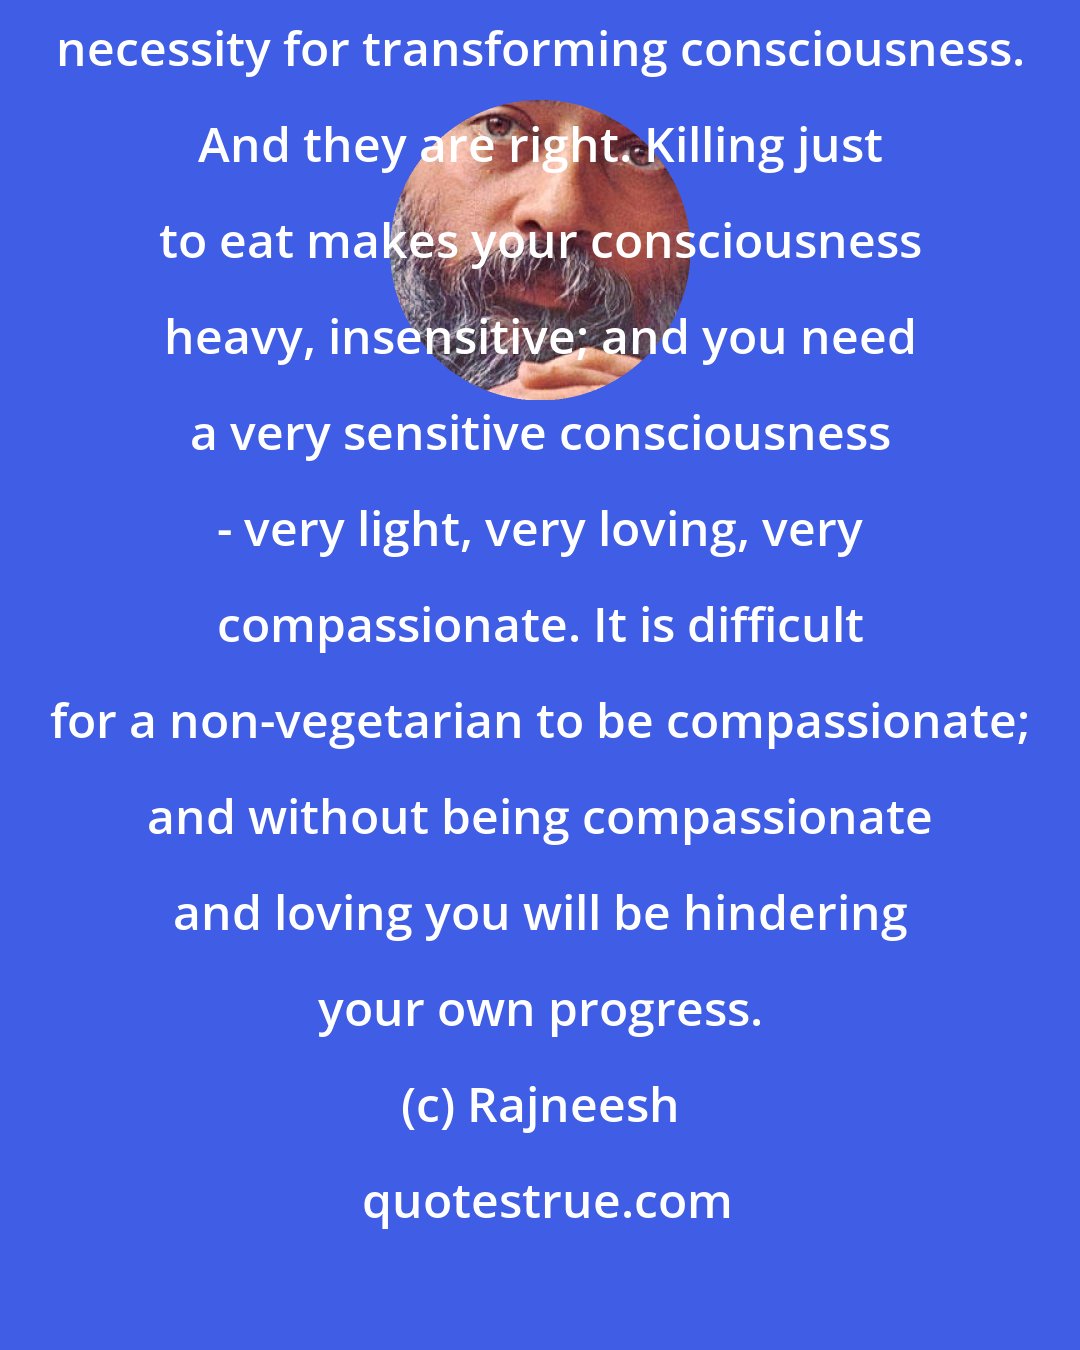 Rajneesh: Jainism is the first religion that has made vegetarianism a fundamental necessity for transforming consciousness. And they are right. Killing just to eat makes your consciousness heavy, insensitive; and you need a very sensitive consciousness - very light, very loving, very compassionate. It is difficult for a non-vegetarian to be compassionate; and without being compassionate and loving you will be hindering your own progress.